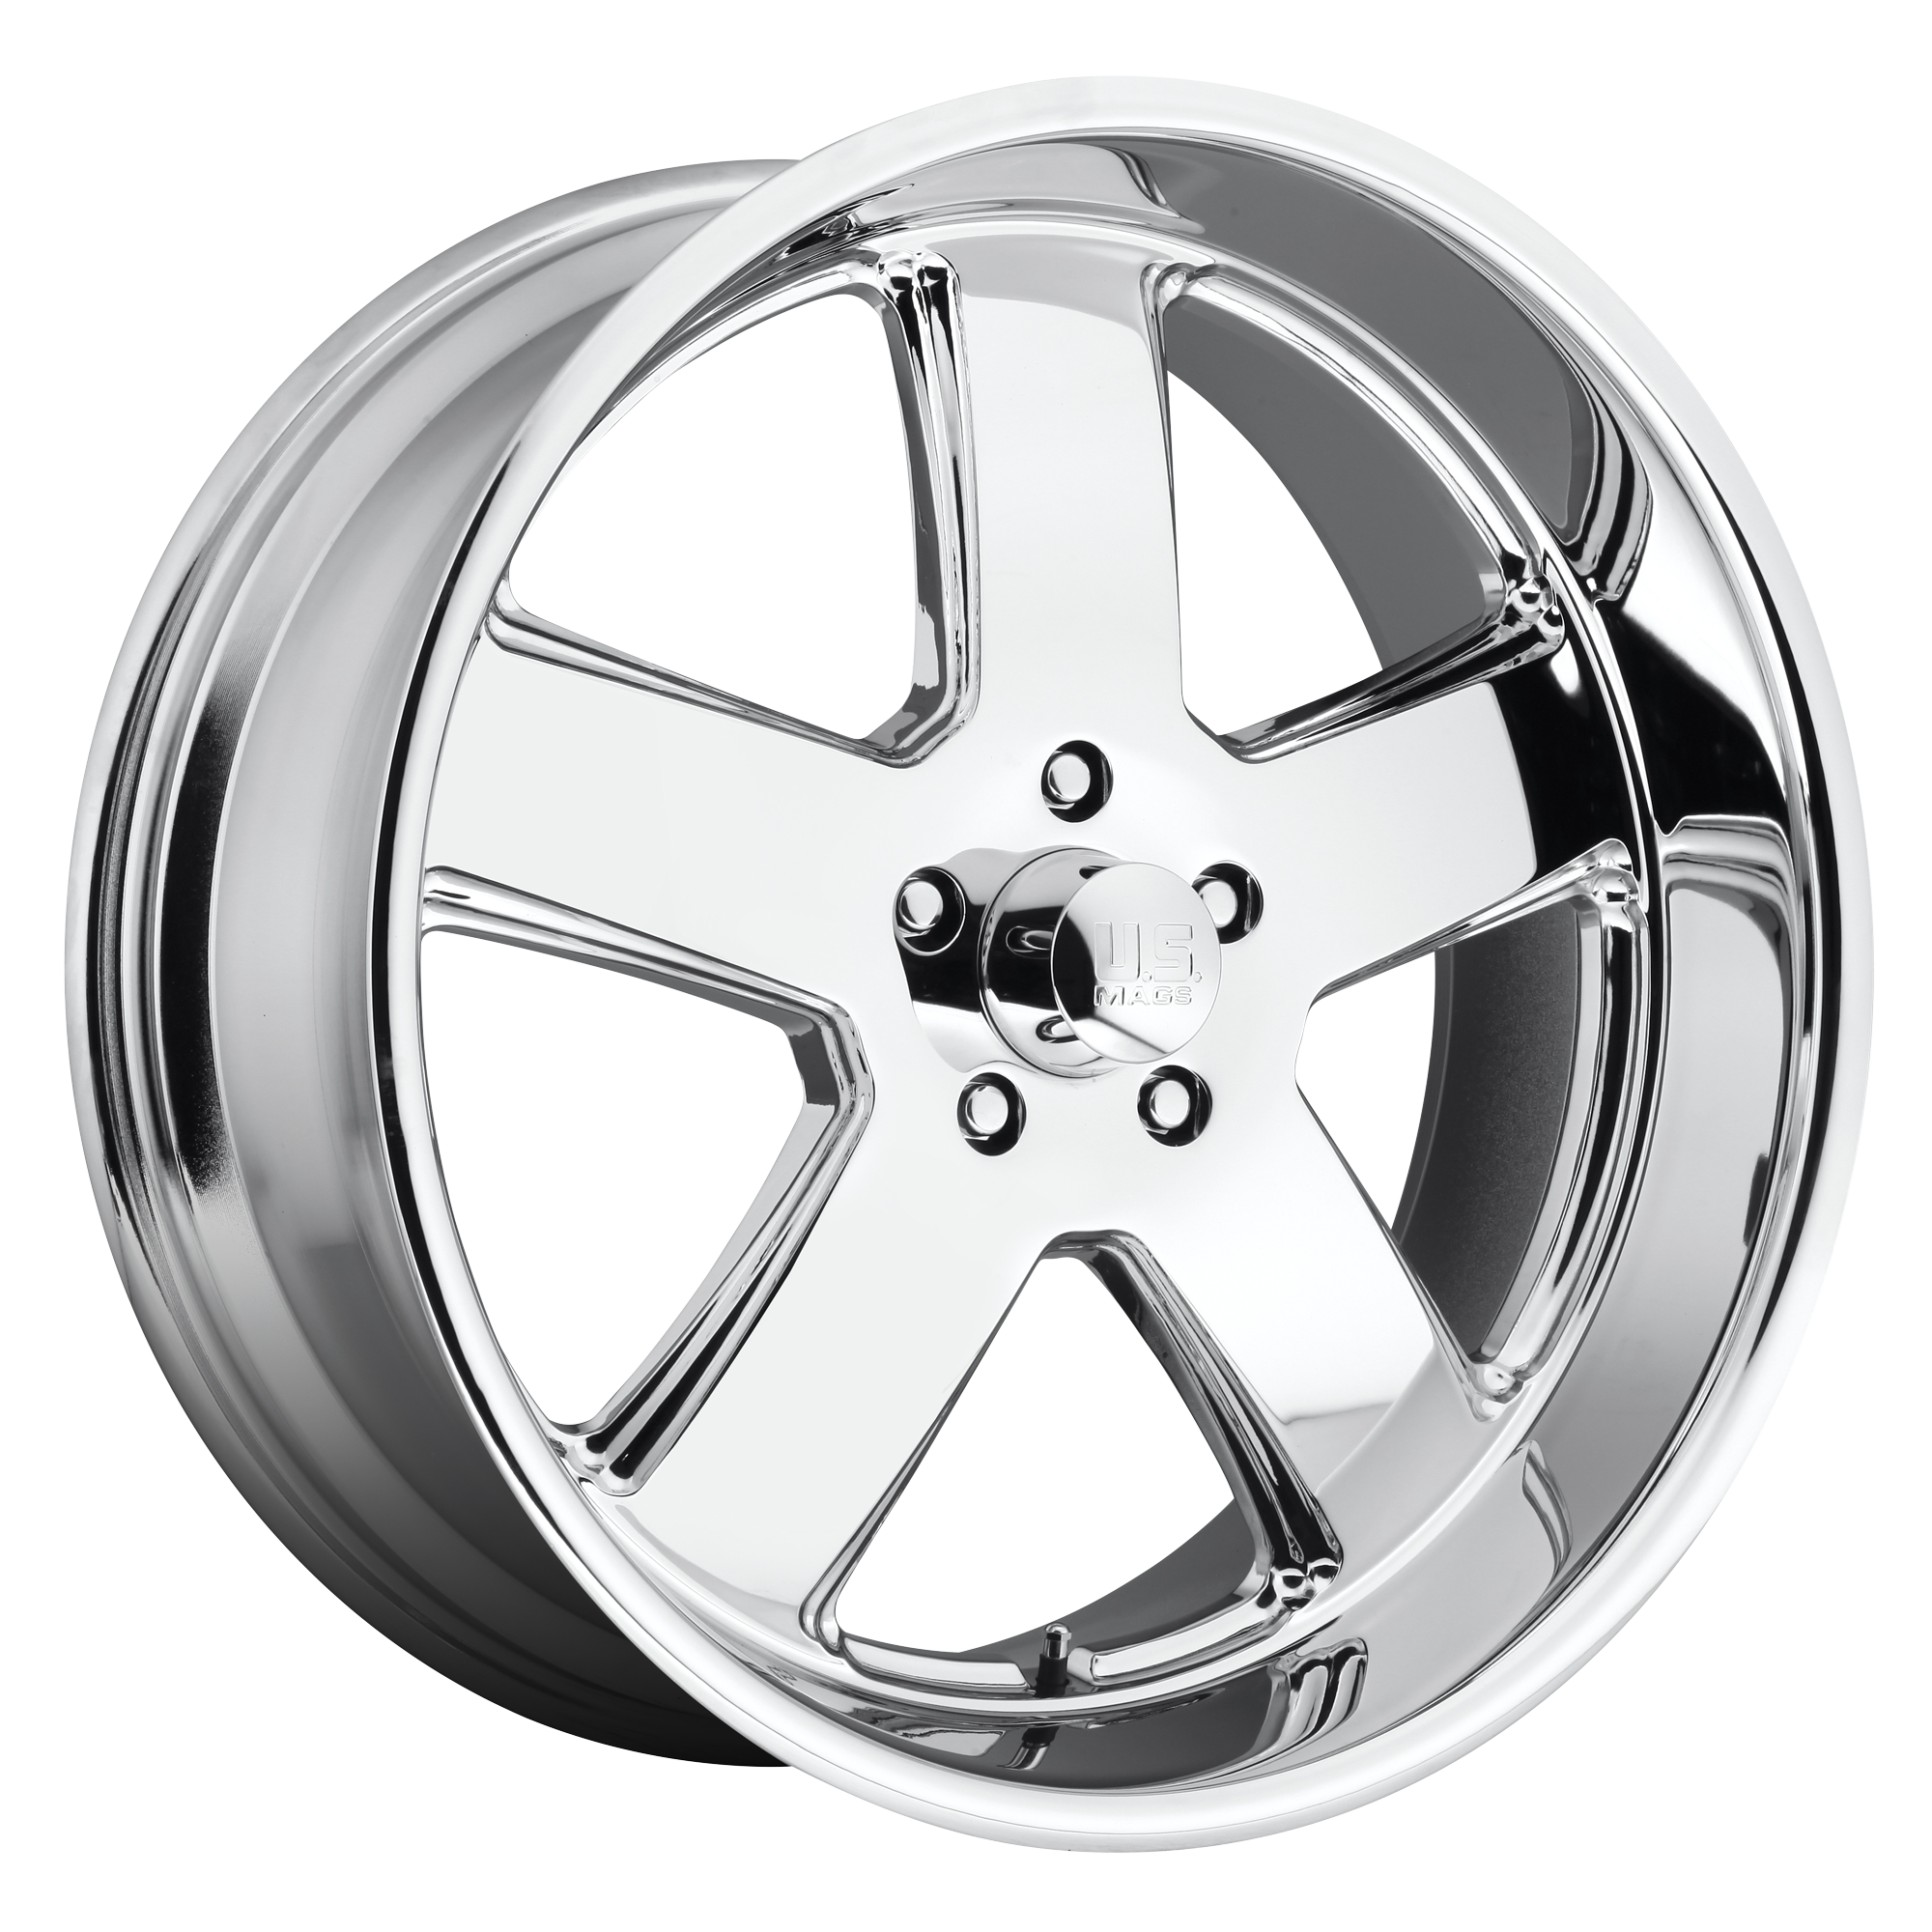 HUSTLER 20x9.5 5x120.65 CHROME PLATED (1 mm) - Tires and Engine Performance